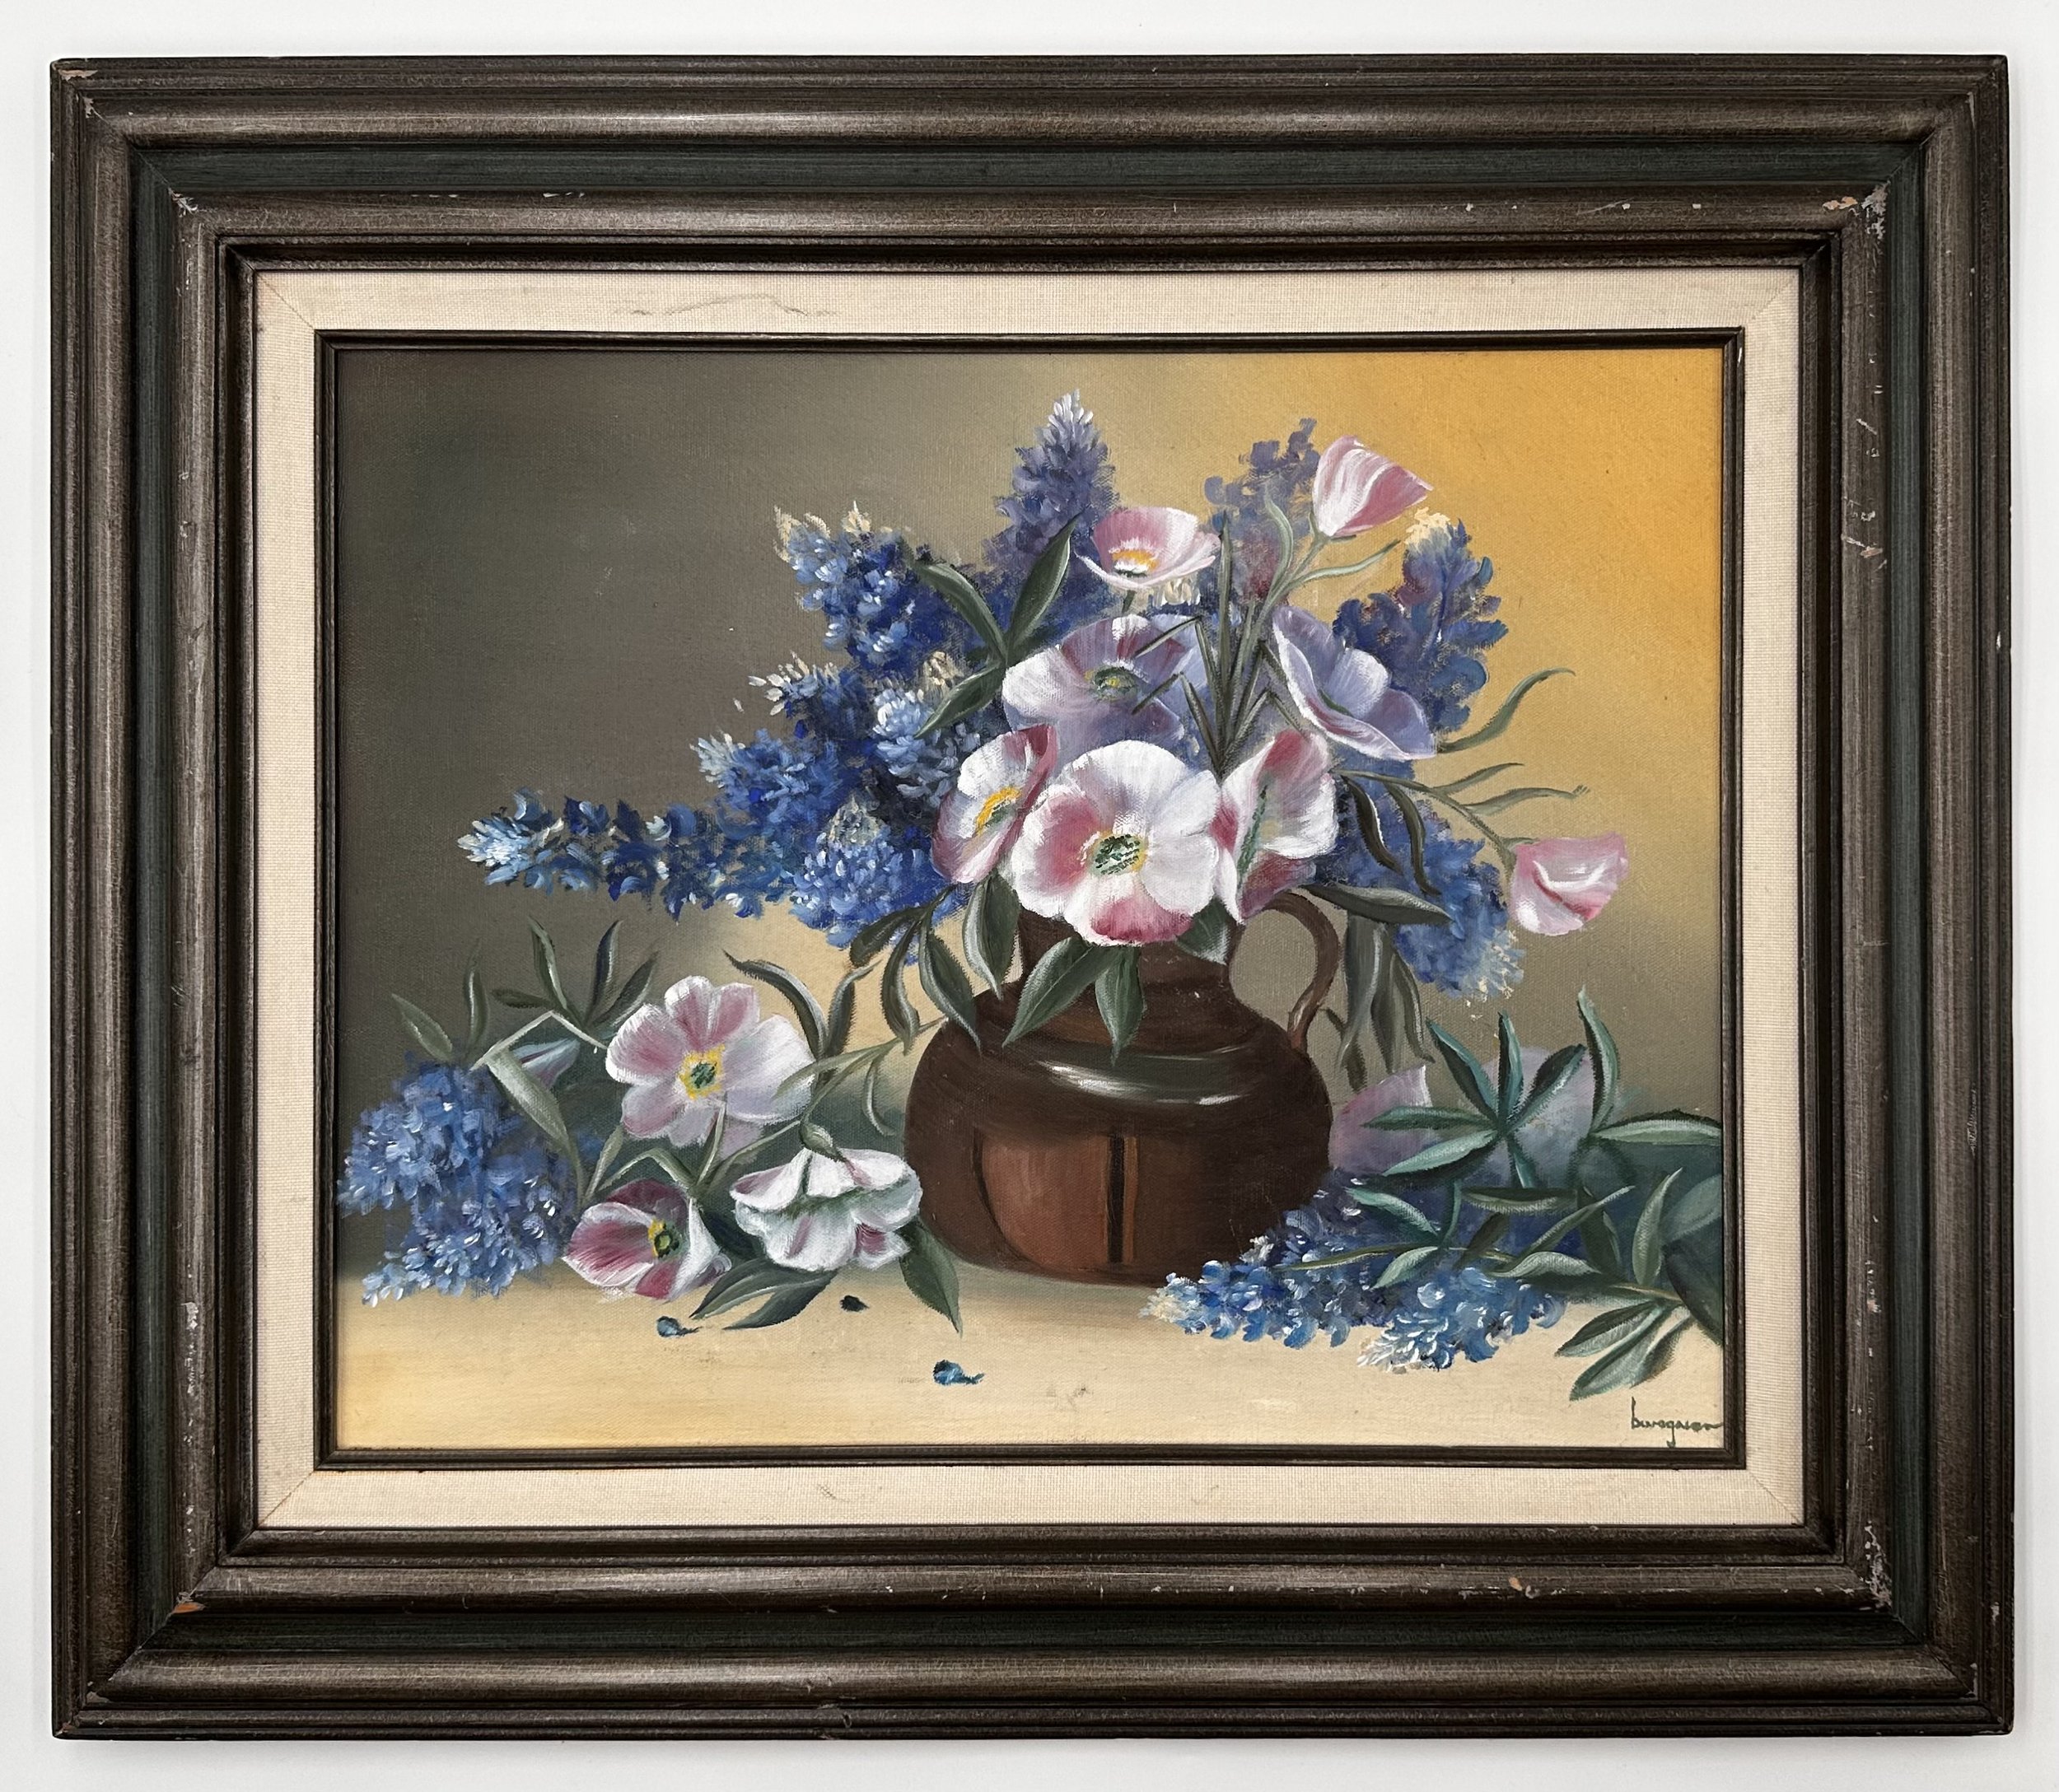 The Copy of Bluebonnets and Evening Primrose